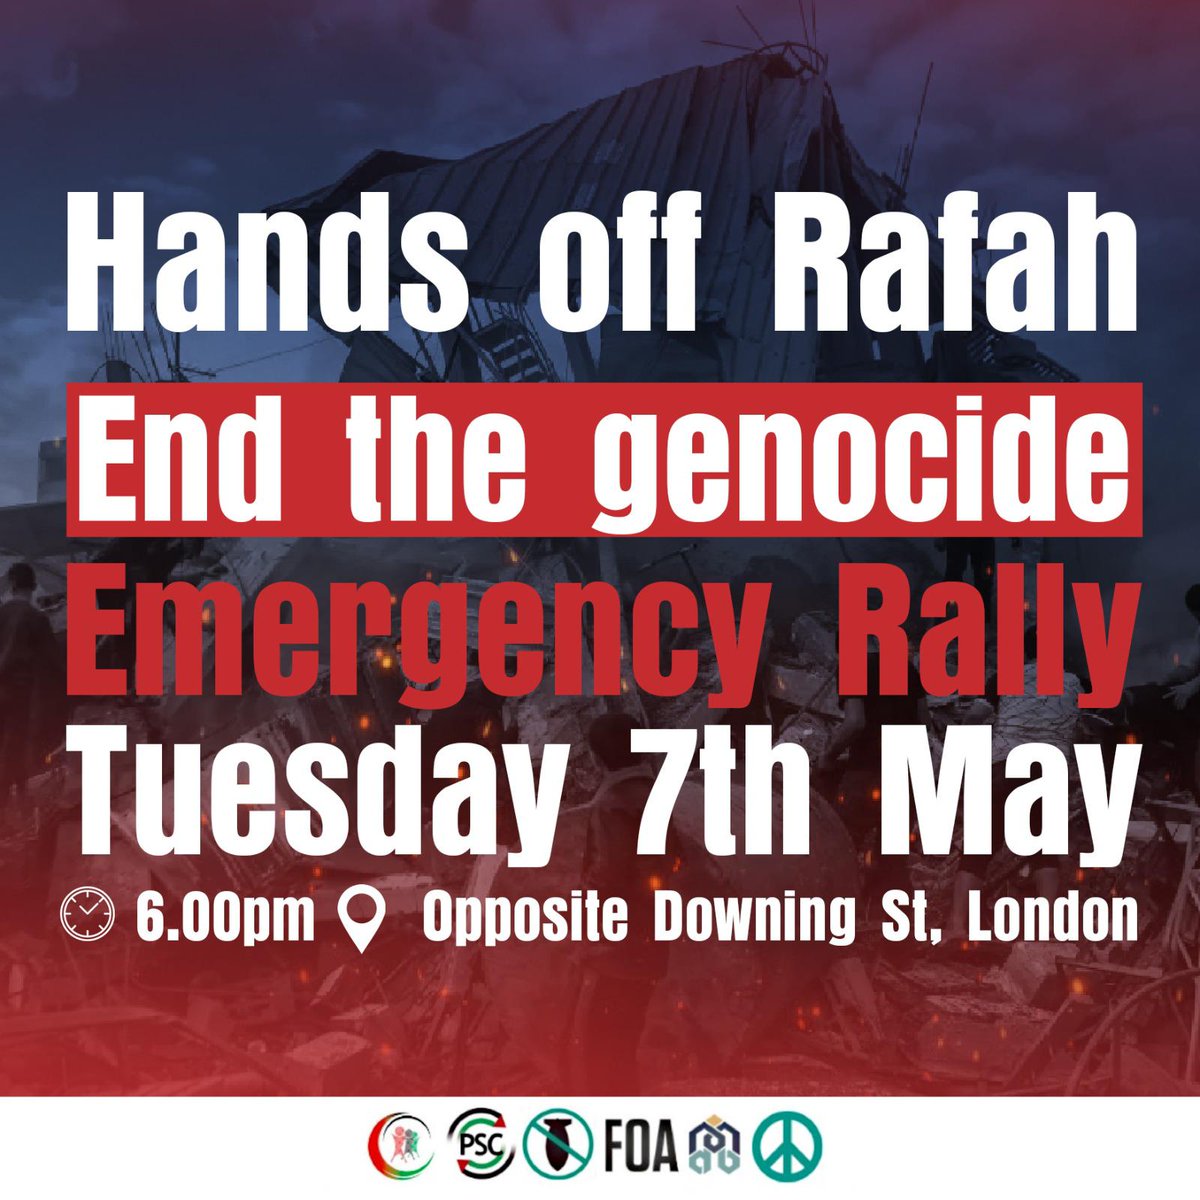 🚨 EMERGENCY PROTEST 🚨 Hands off Rafah - Stop the Genocide Israeli military has ordered Palestinians to move out of Rafah, warning it is about to use “extreme force”. 🗓 Tuesday 7 May, 6pm 📍Outside Downing Street Join us in numbers 💪🏾 #HandsOffRafah #StopTheGenocide